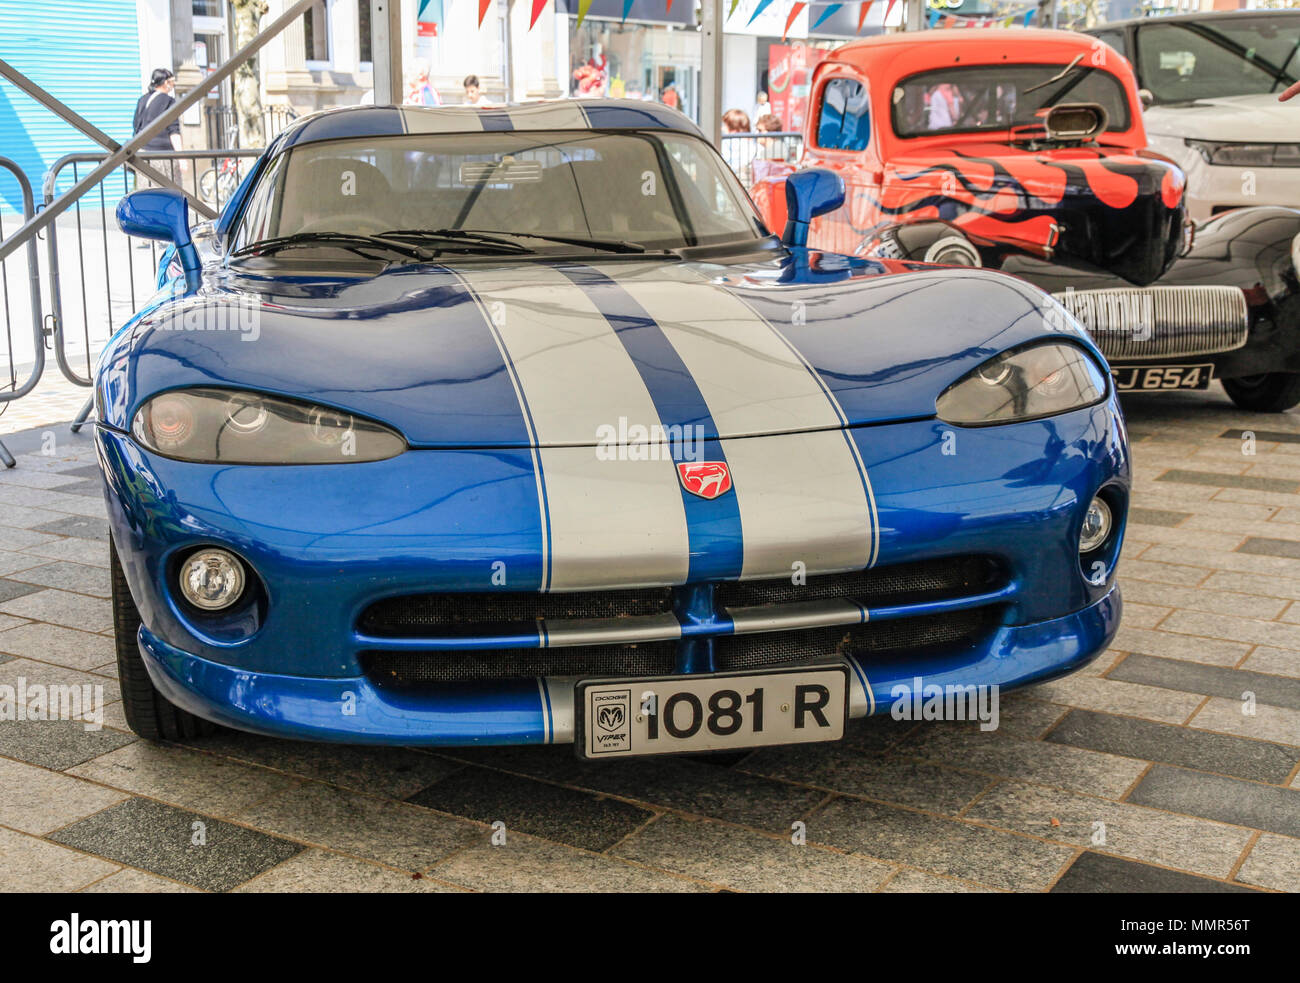 A Dodge Viper sports car at the Supercar Event,High Street,Stockton on Tees,England,UK Stock Photo